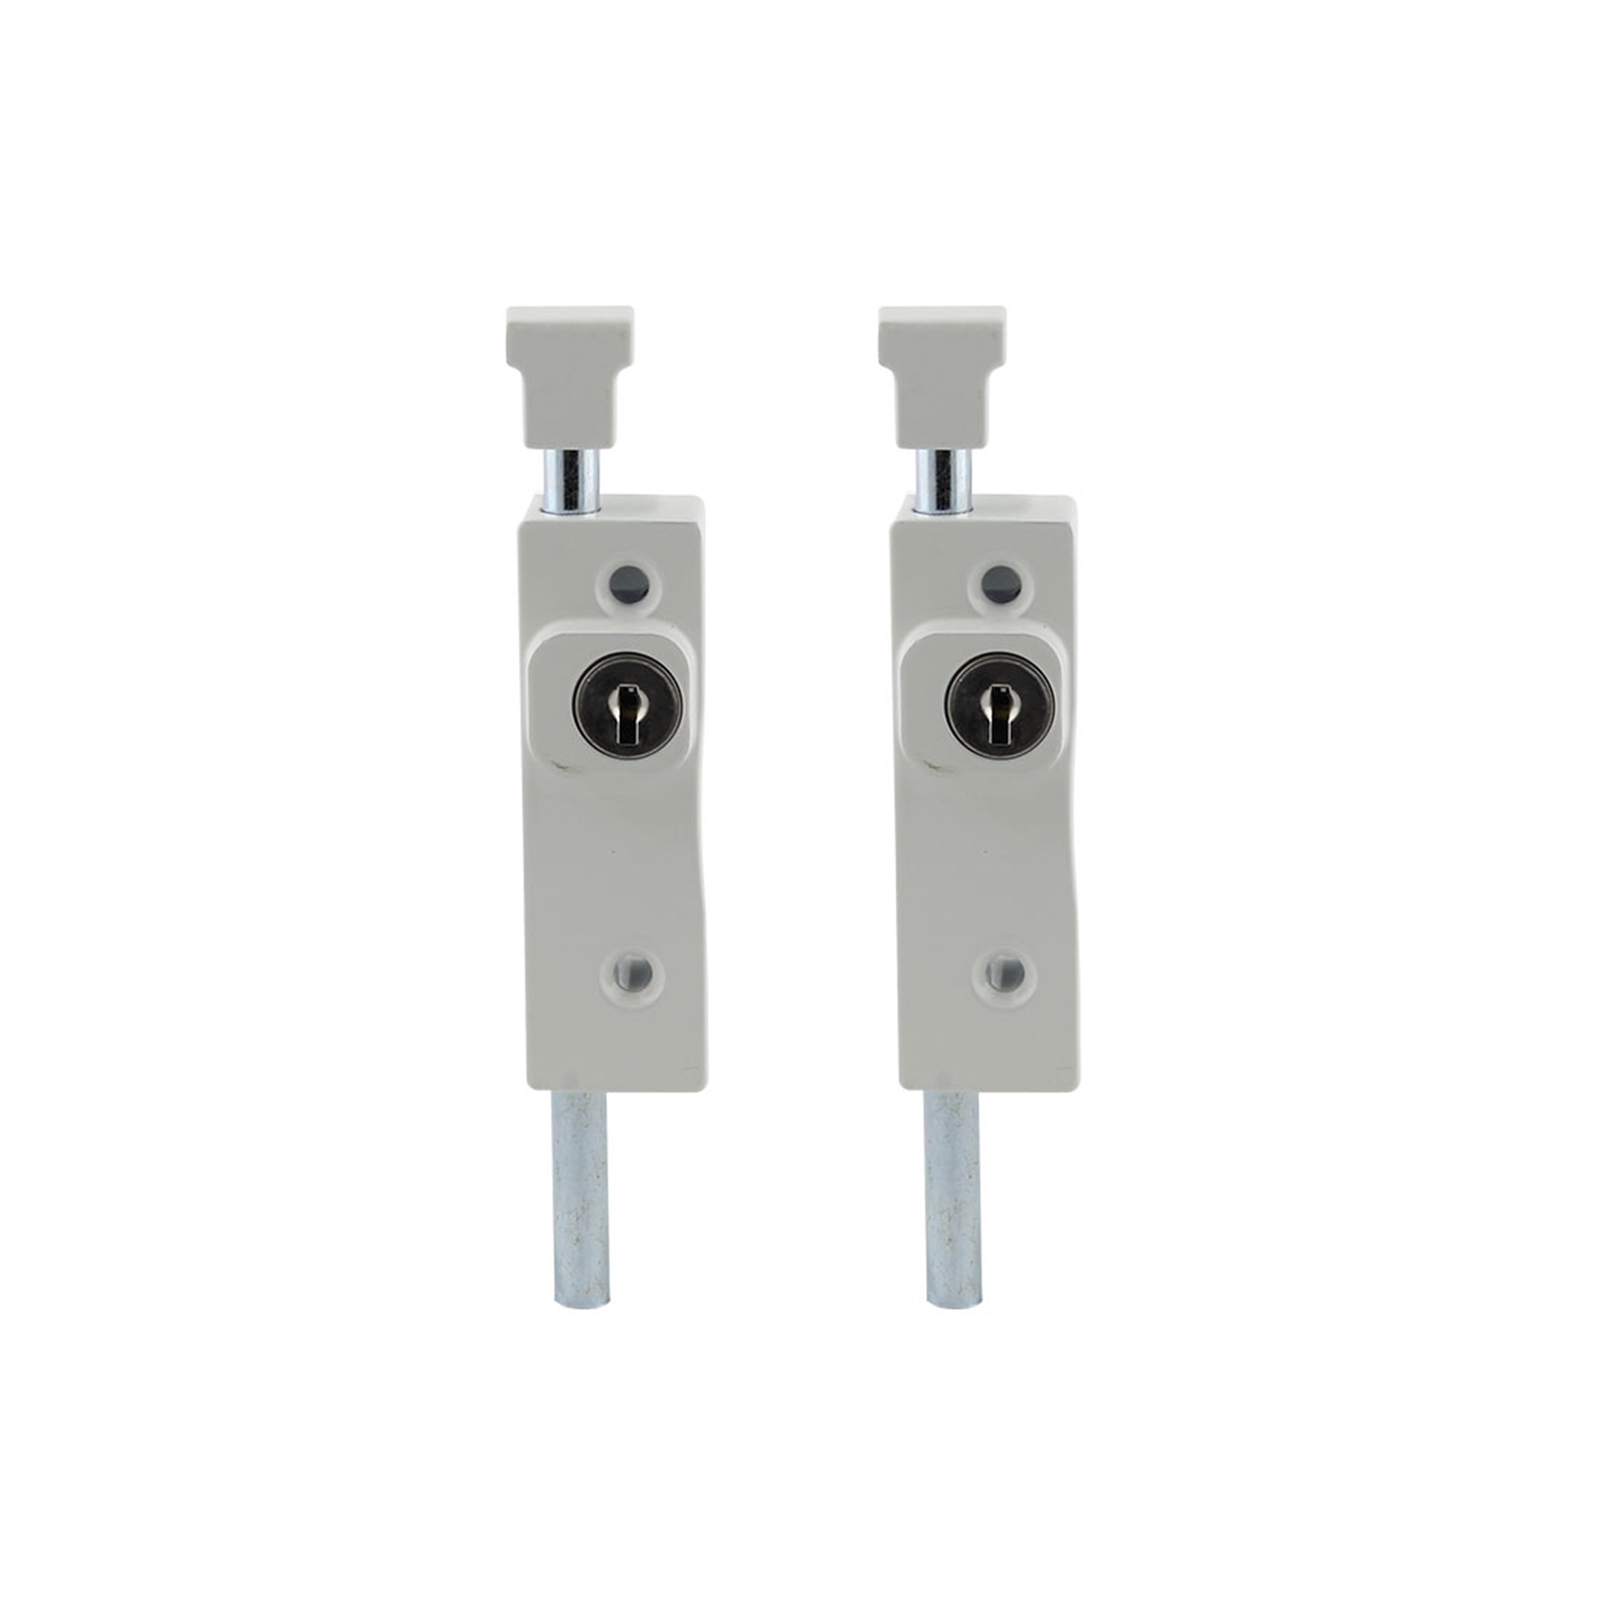 Ikonic White Patio Bolt - 2 Pack